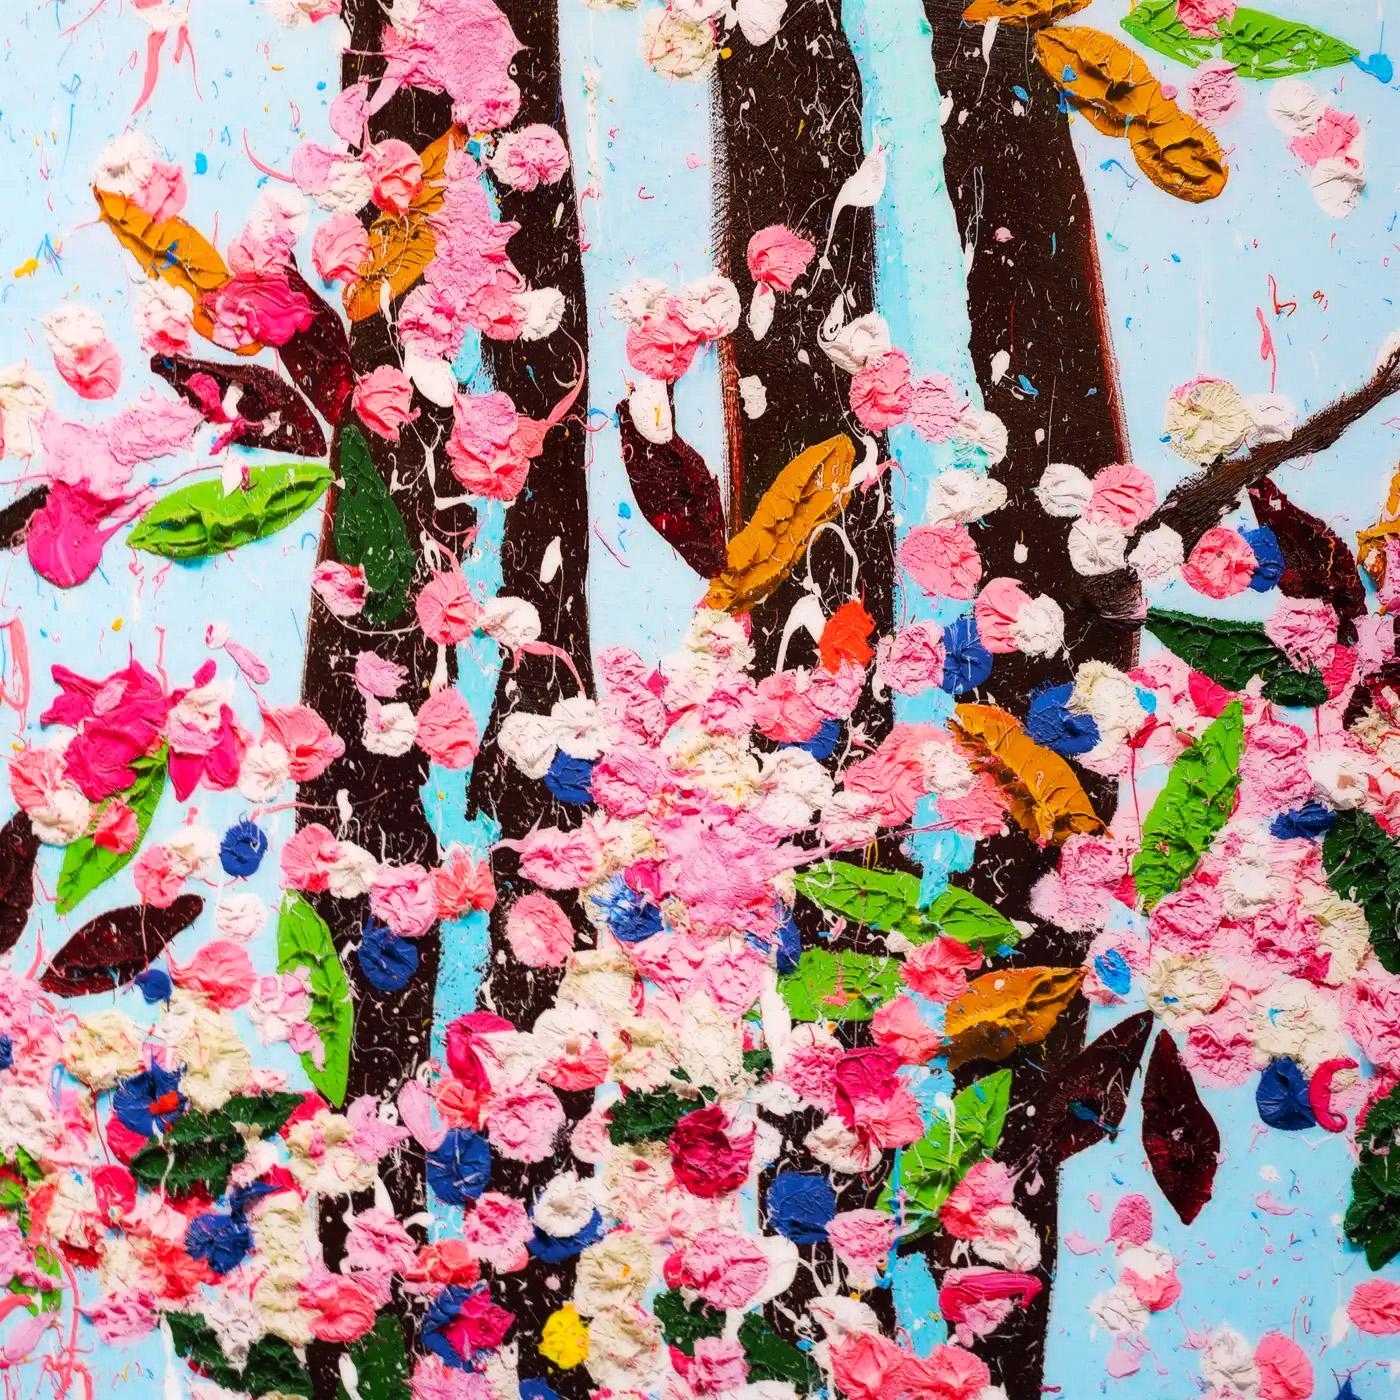 The Virtues 'Courage', Limited Edition 'Cherry Blossom' Landscape - Young British Artists (YBA) Print by Damien Hirst